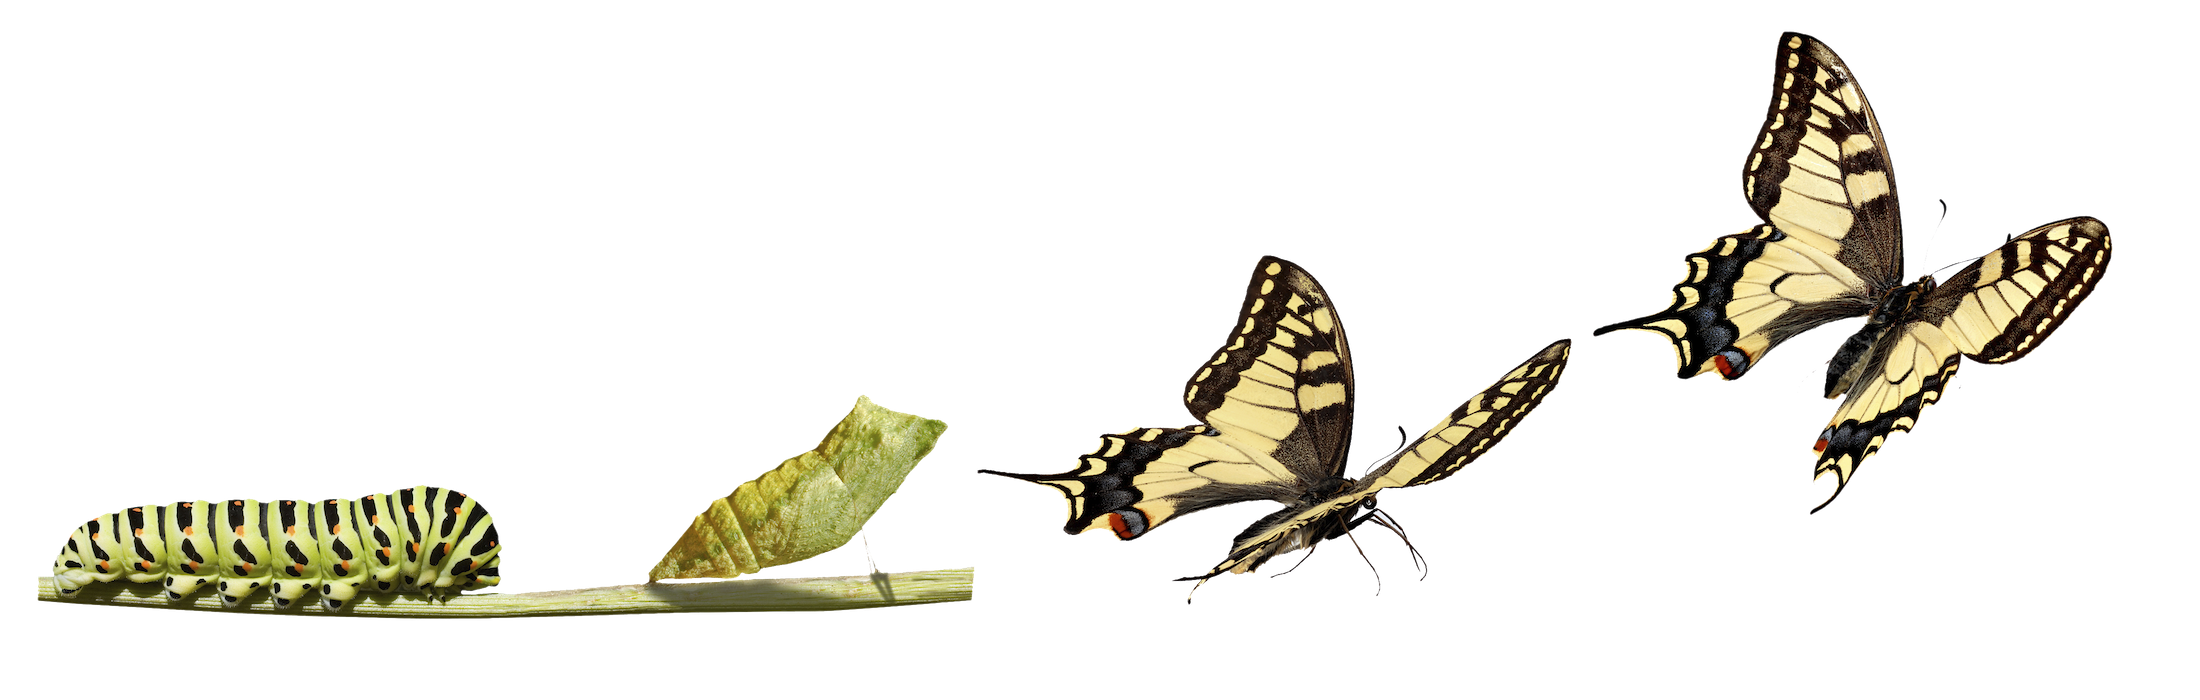 TransformationButterfly.png